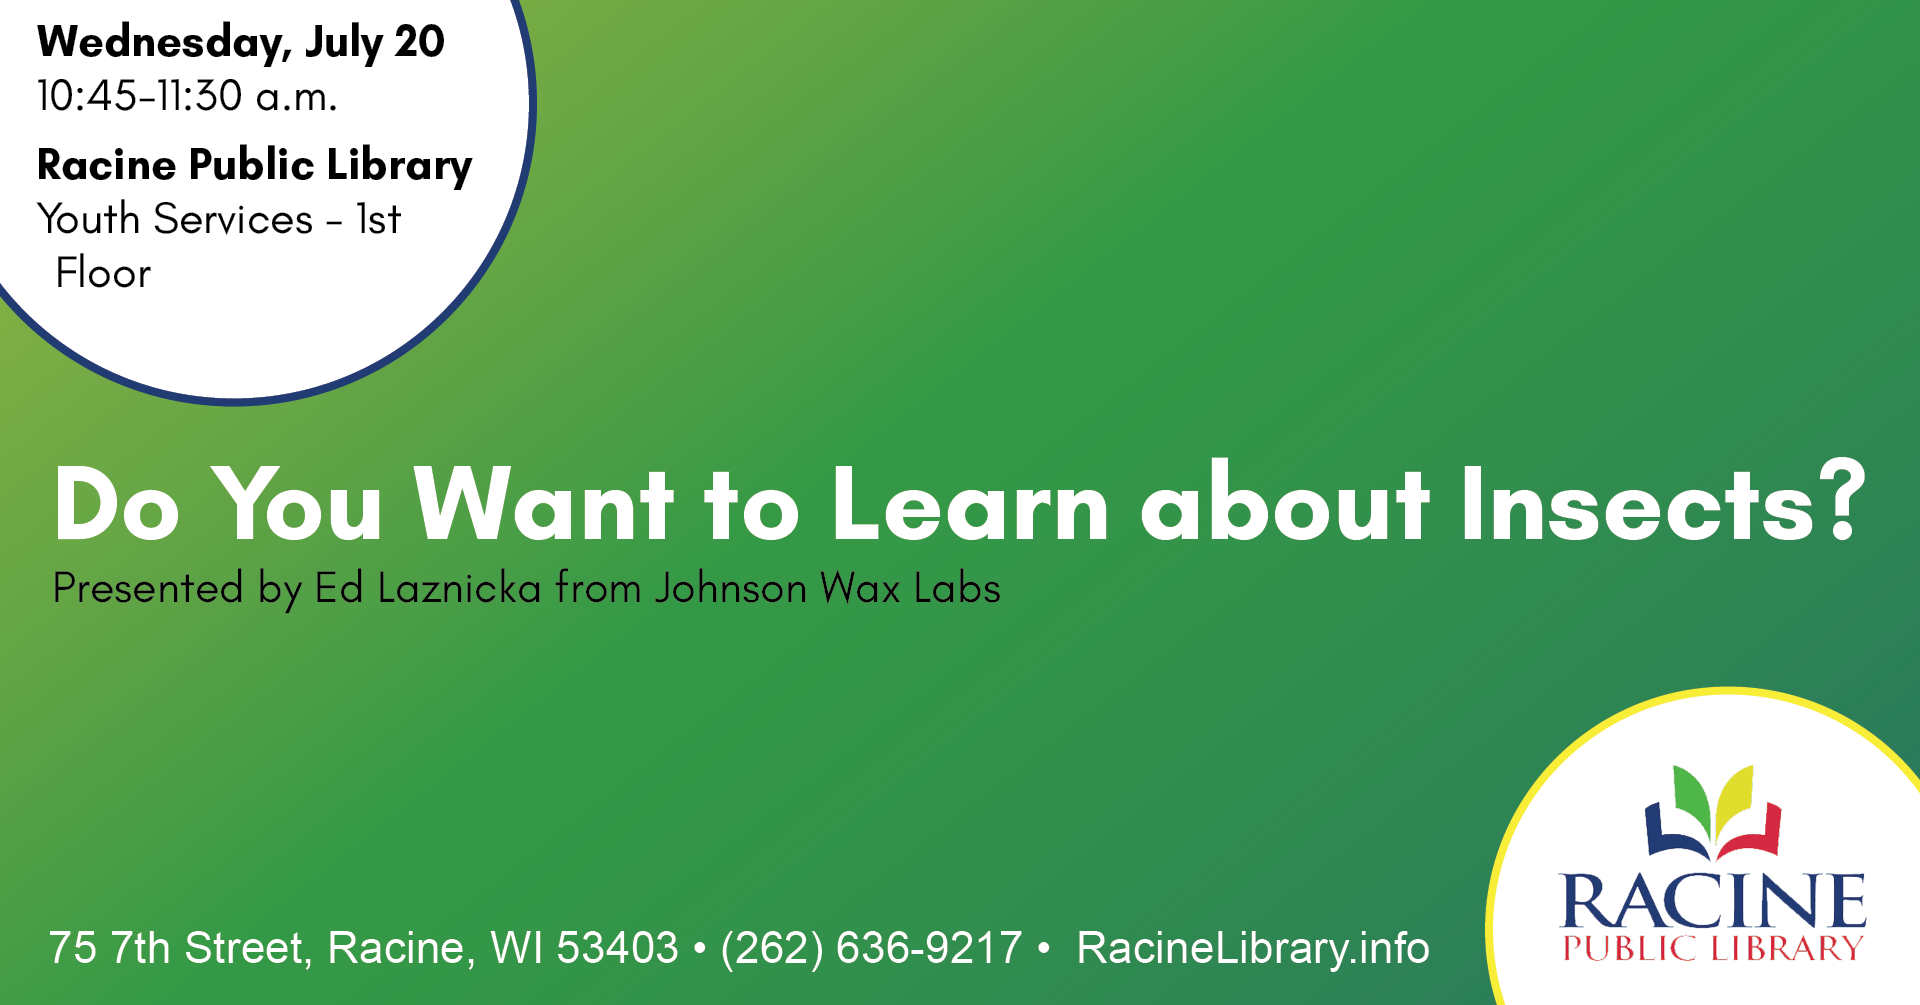 Do You Want to Learn about Insects. Presented by Ed Laznicka from Johnson Wax Labs. Wednesday, July 20, 10:45-11:30 a.m. Racine Public Library. Youth Services - 1st Floor.